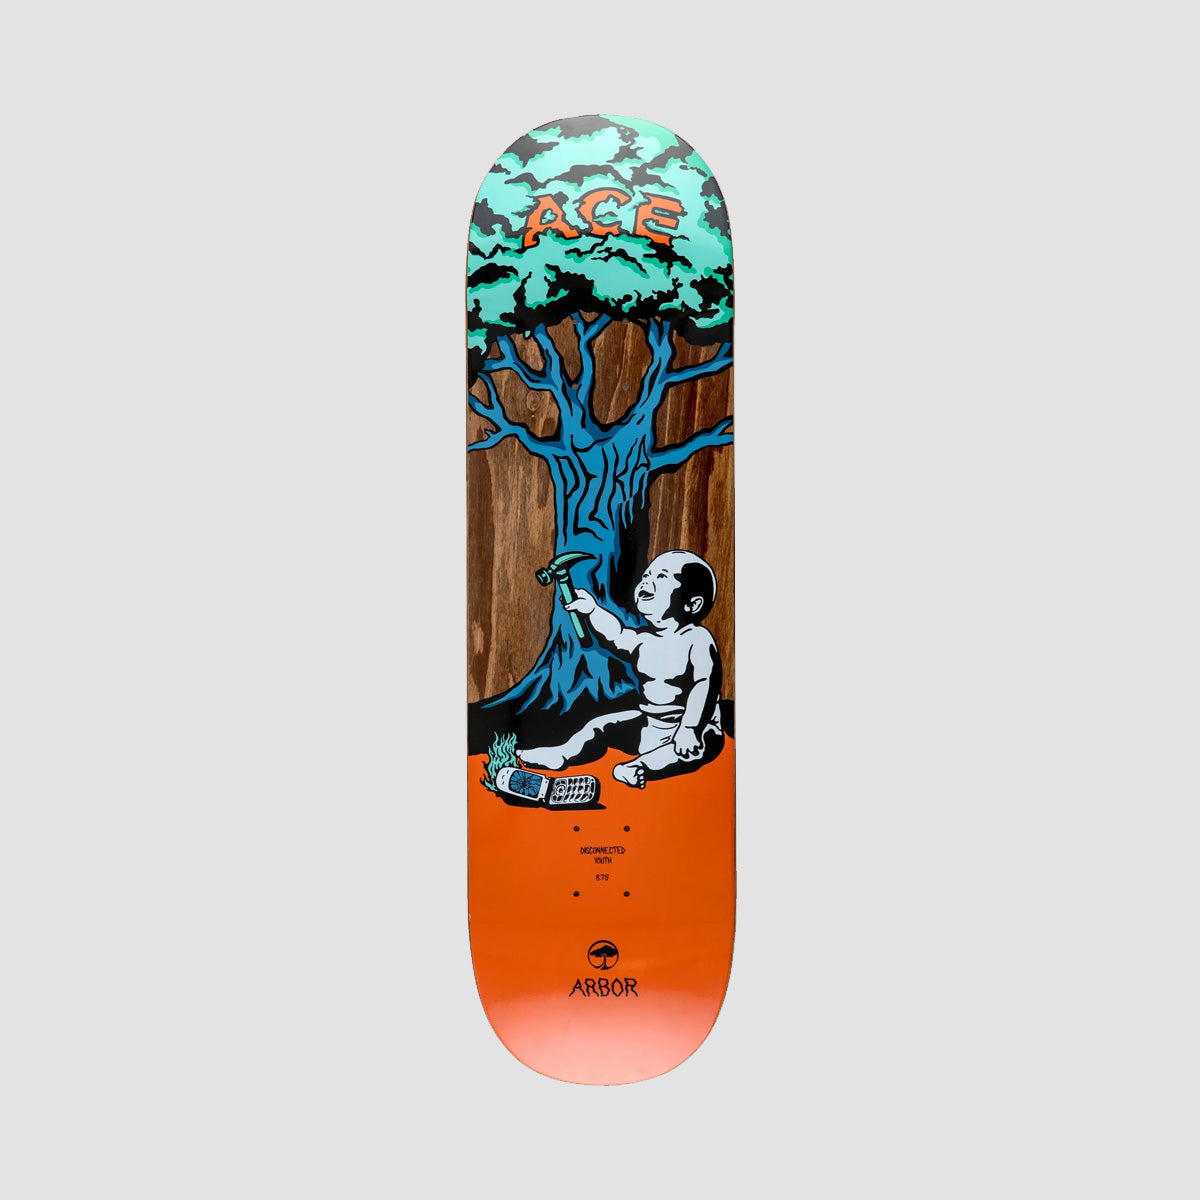 Arbor Ace Pelka Disconnected Youth Skateboard Deck - 8.75"